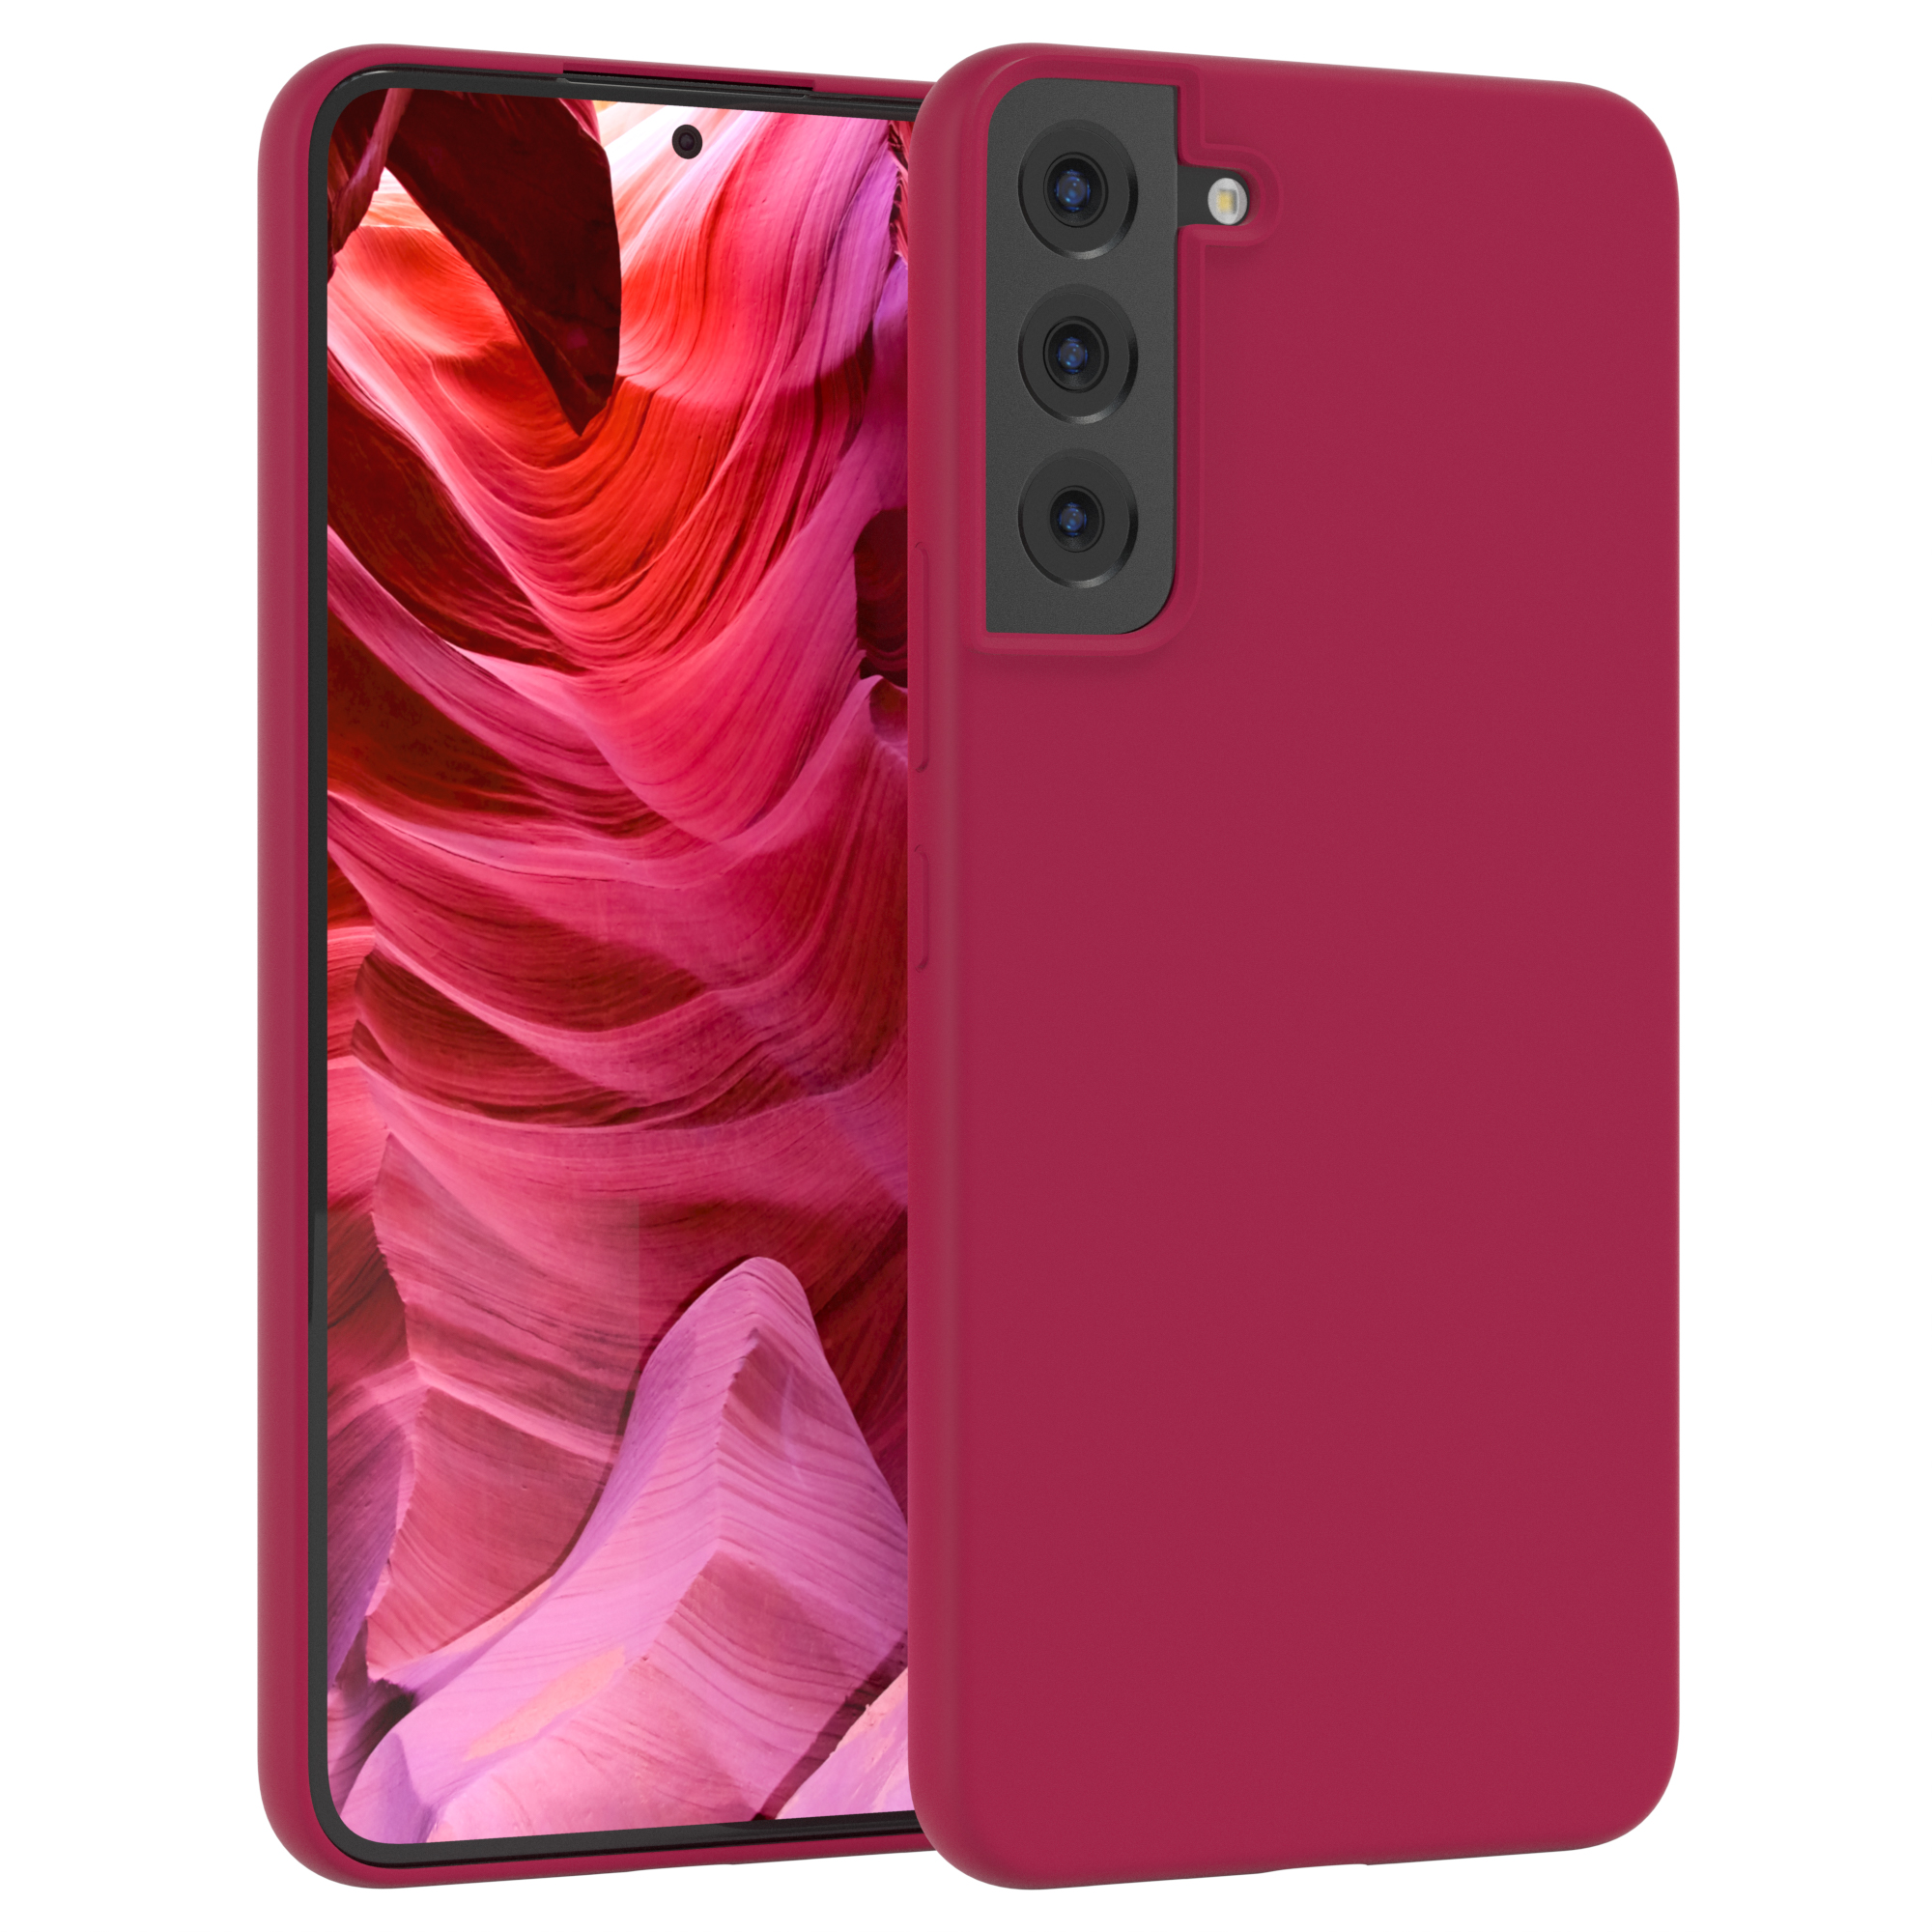 EAZY CASE Premium Silikon S22 Backcover, Handycase, 5G, Samsung, Galaxy Rot Plus Beere 